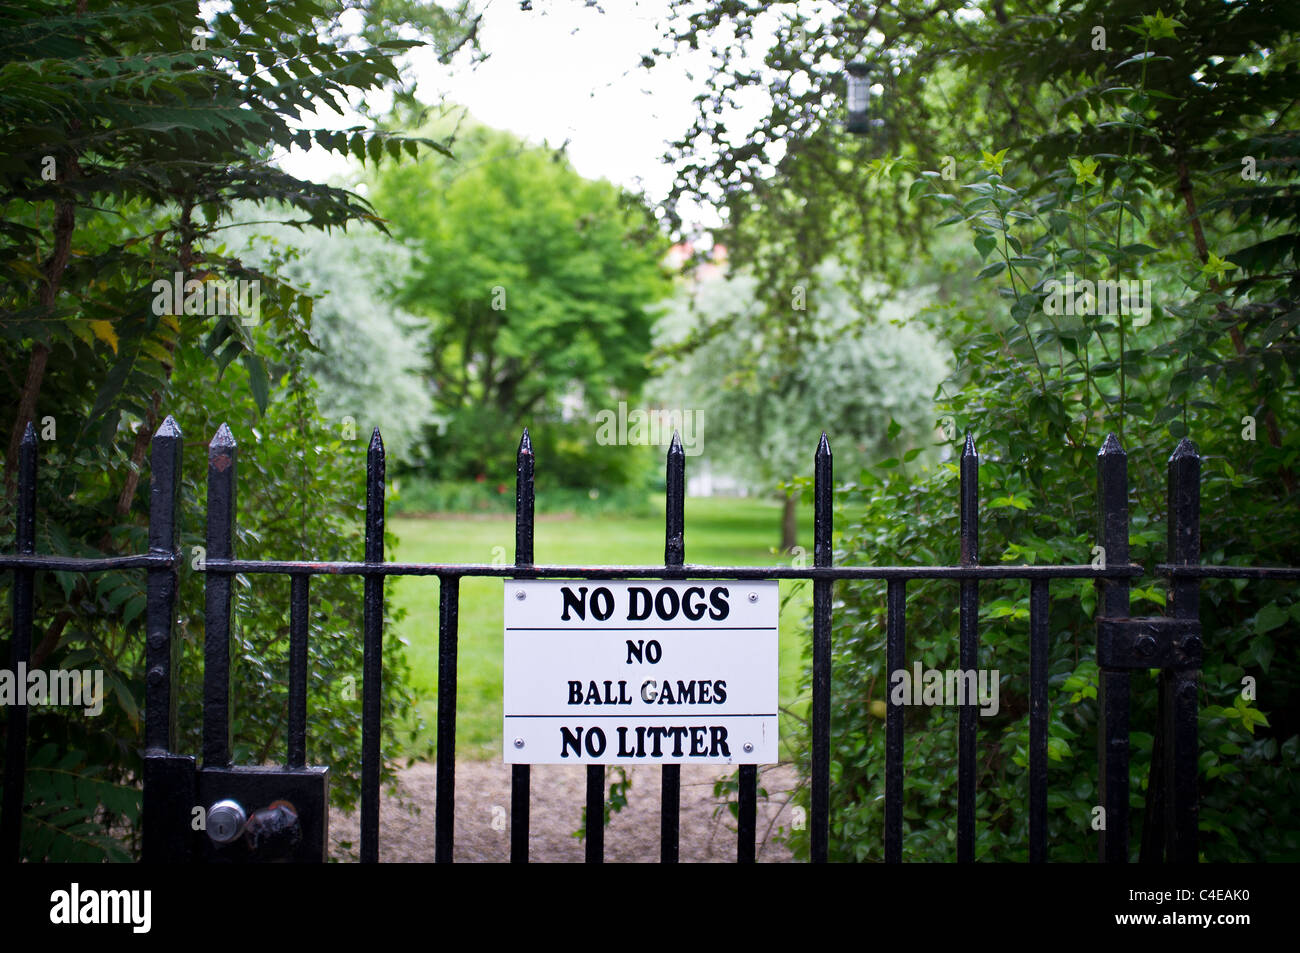 No Dogs No Ball Games No Litter sign on park gates Stock Photo